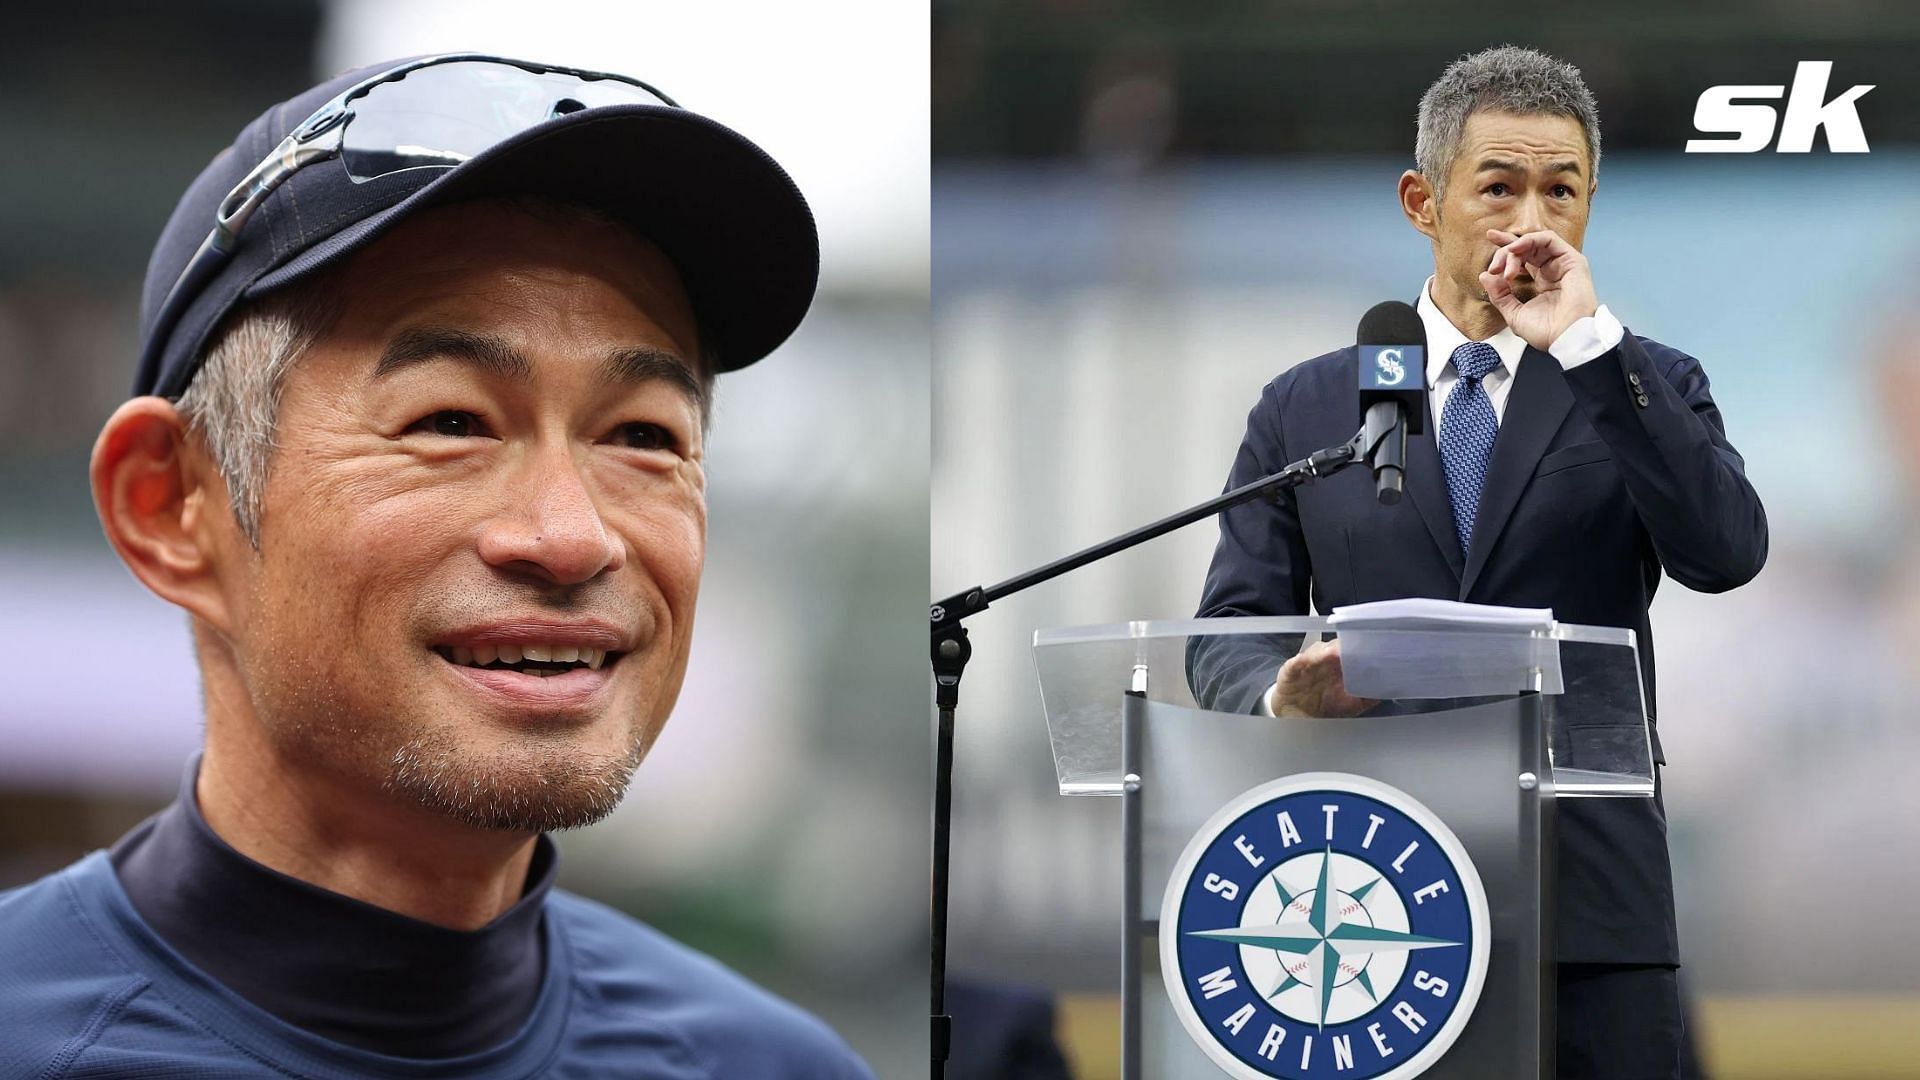 Ichiro Suzuki has a legitimate case to be elected unanimously into the Baseball Hall of Fame in 2025